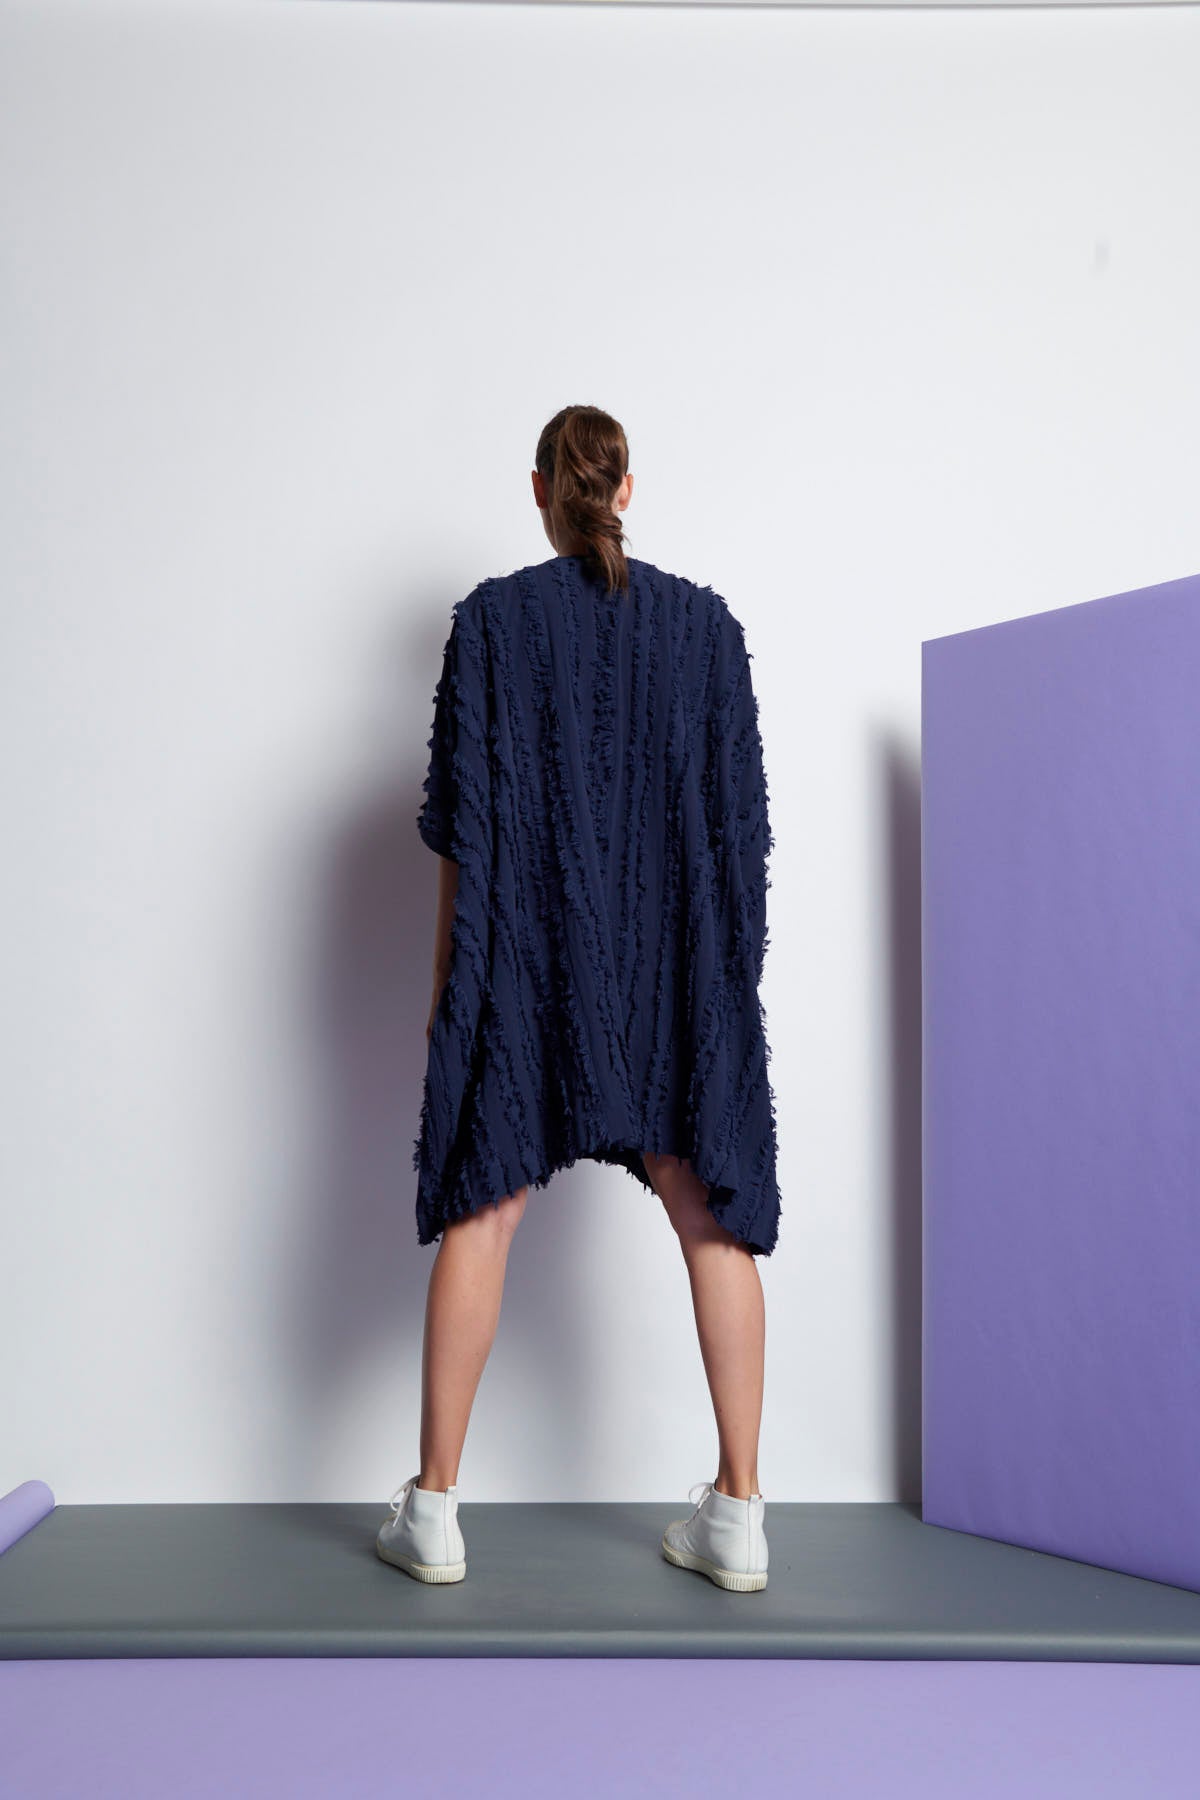 A navy blue easy fit, square cut, knee-length dress made from cotton and linen with round neckline, short sleeves, and striped fringe fabric